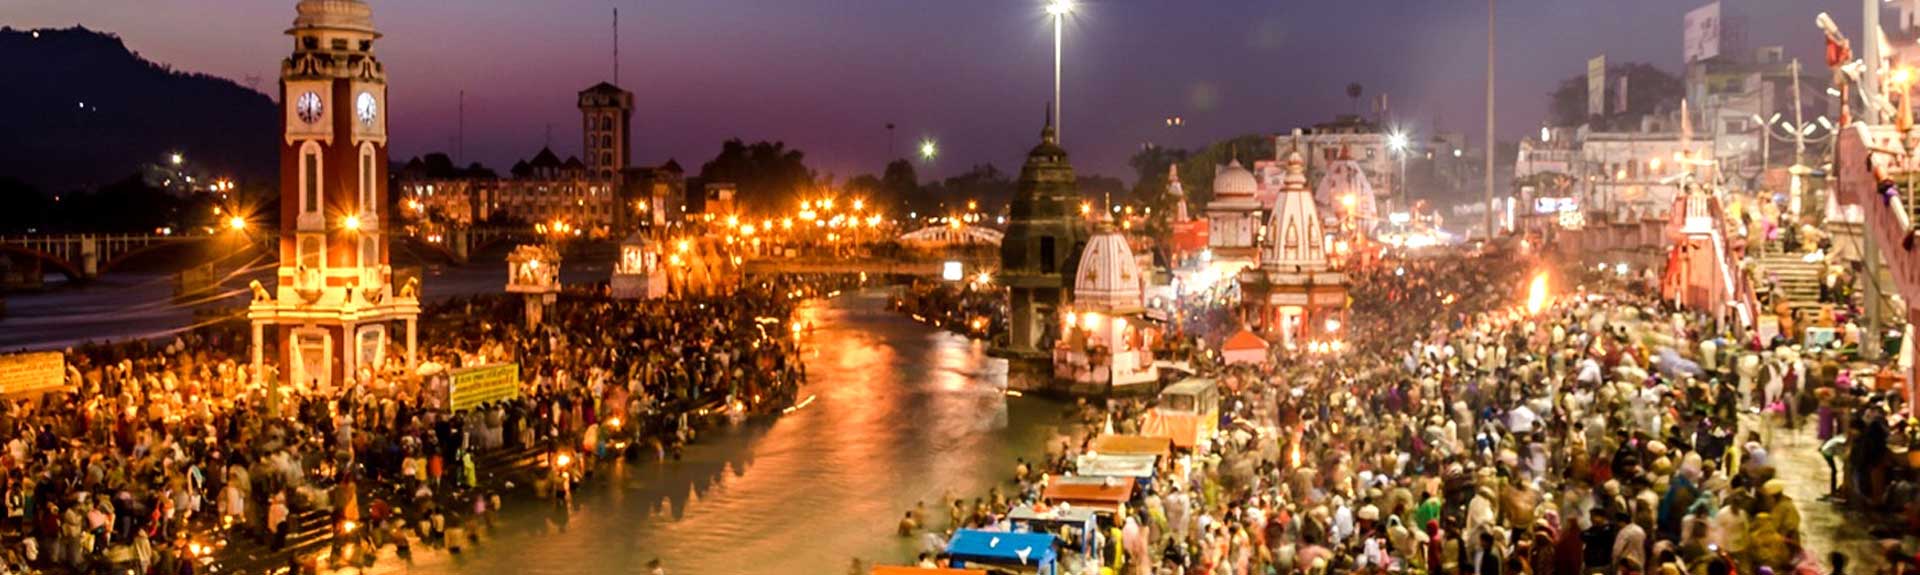 Taxi for Chardham yatra from Haridwar